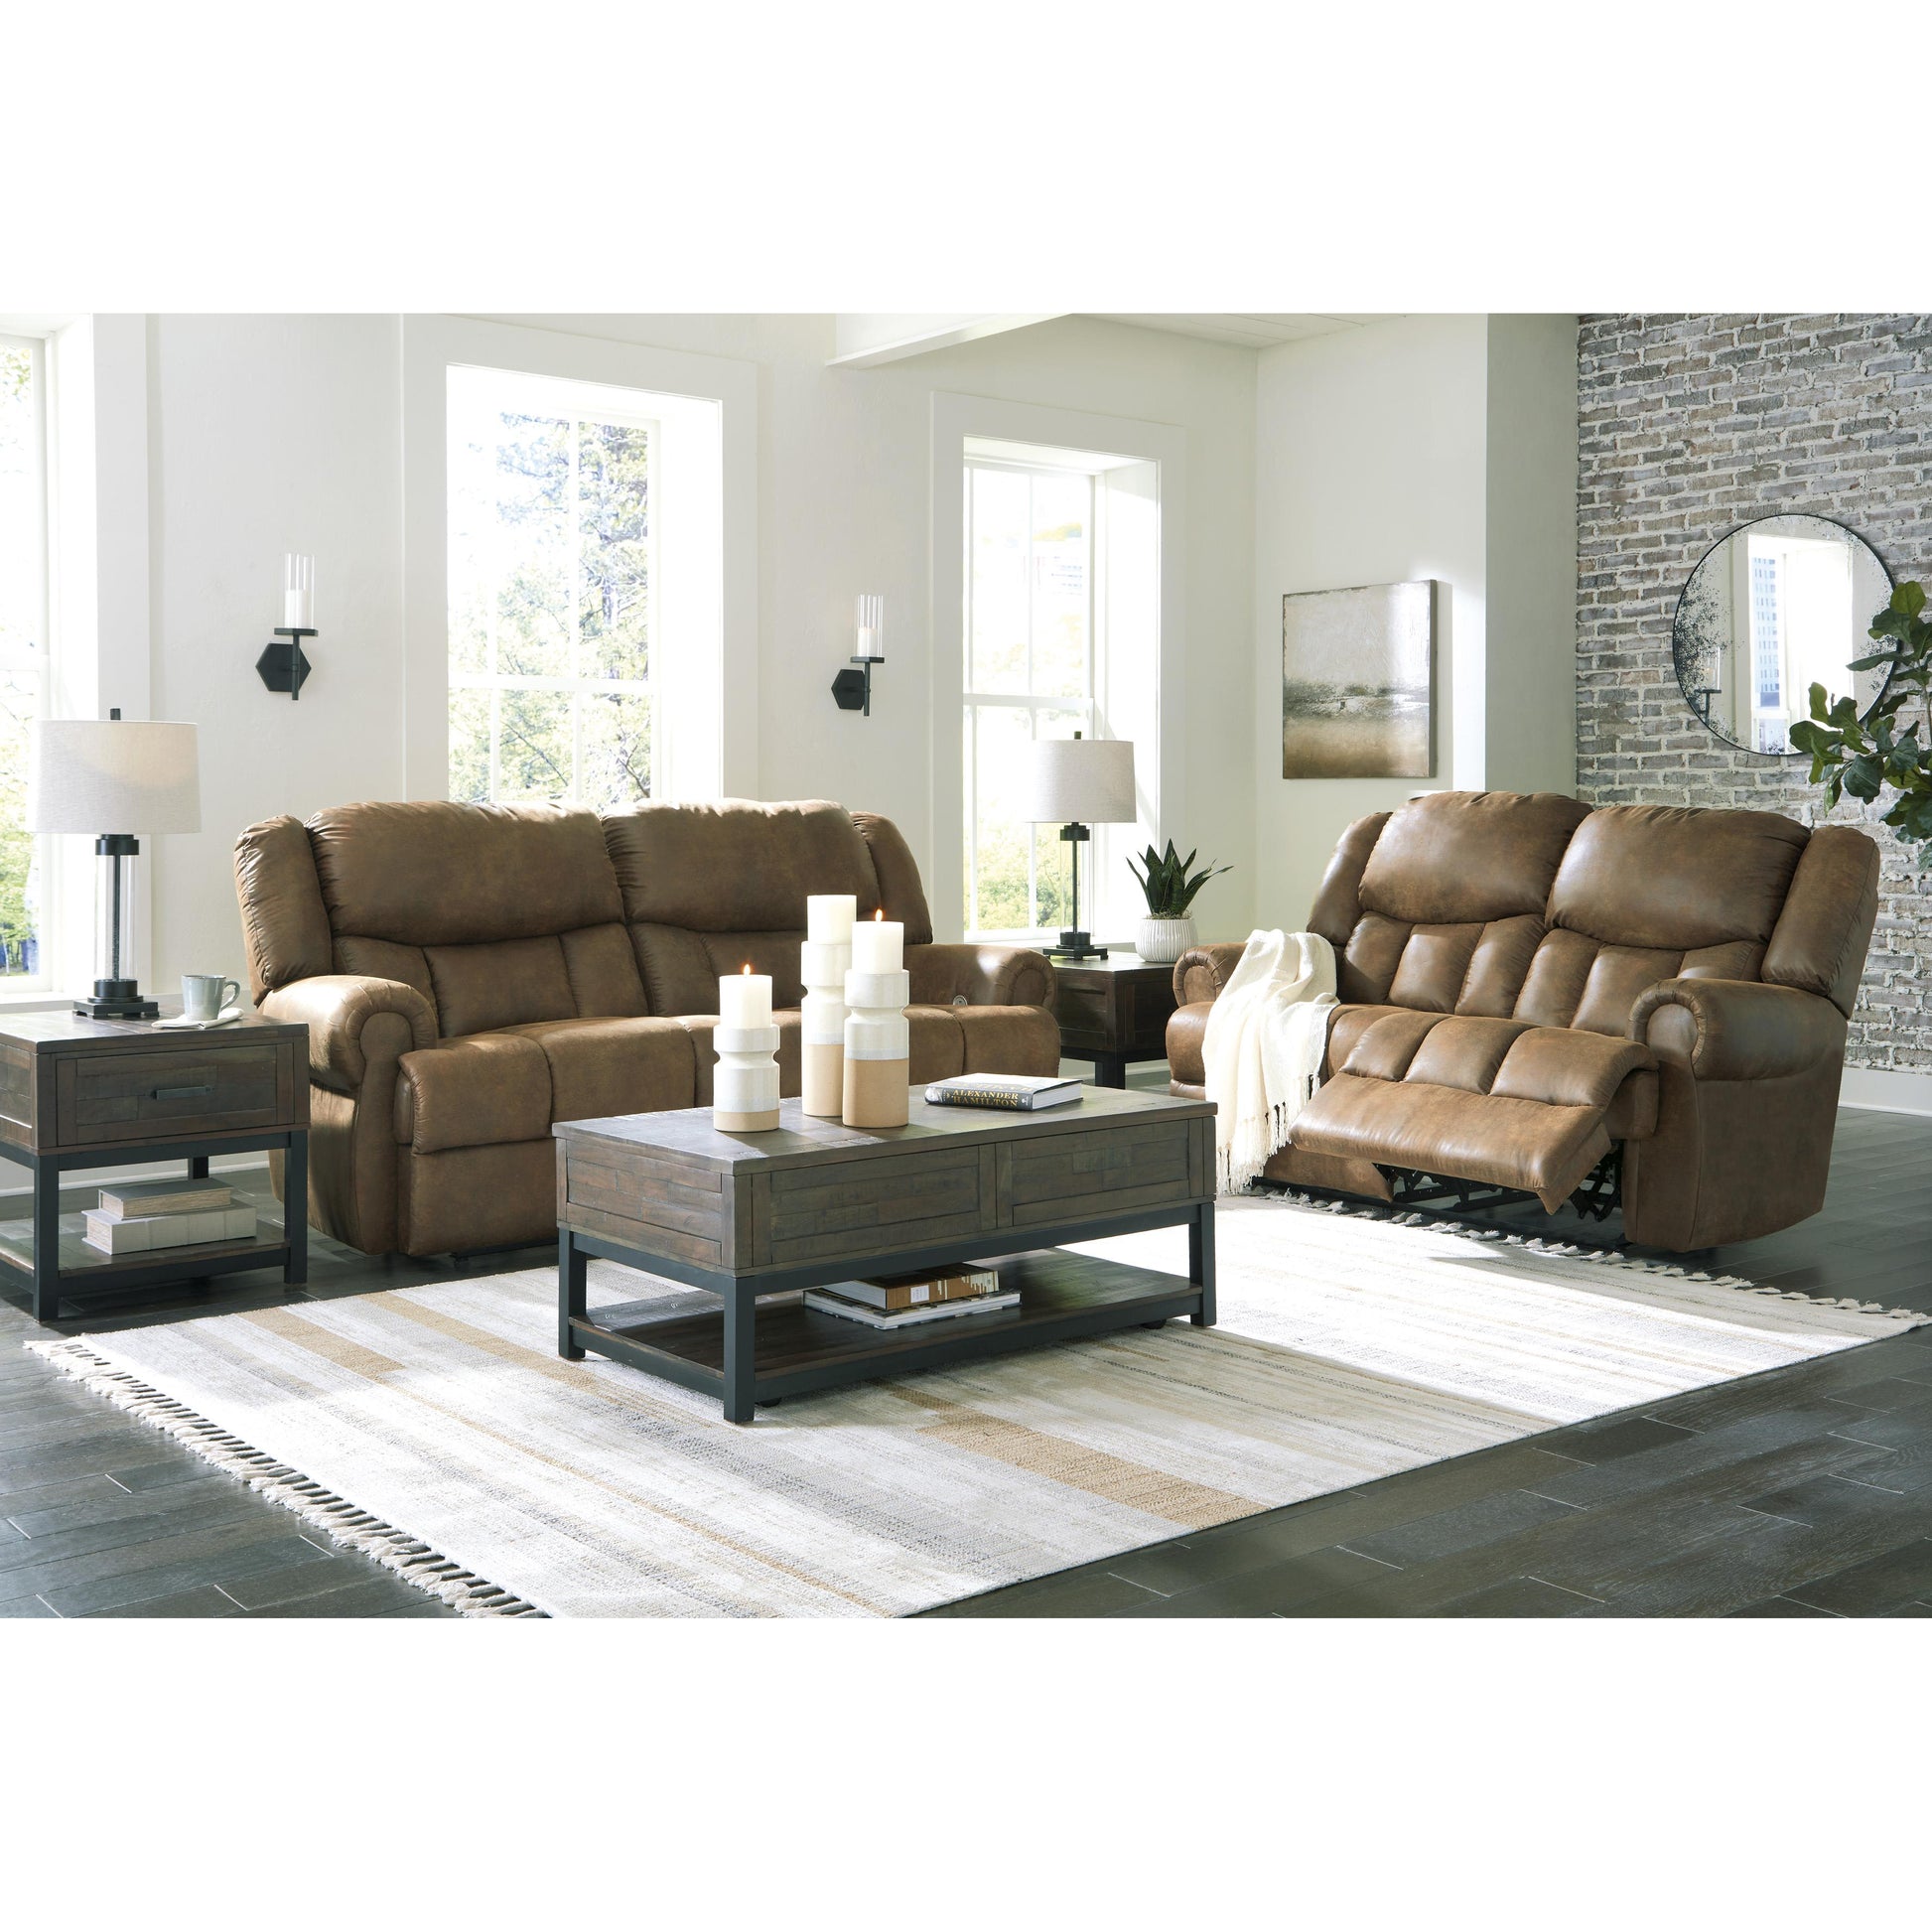 Signature Design by Ashley Boothbay Power Reclining Leather Look Loveseat 4470474 IMAGE 8